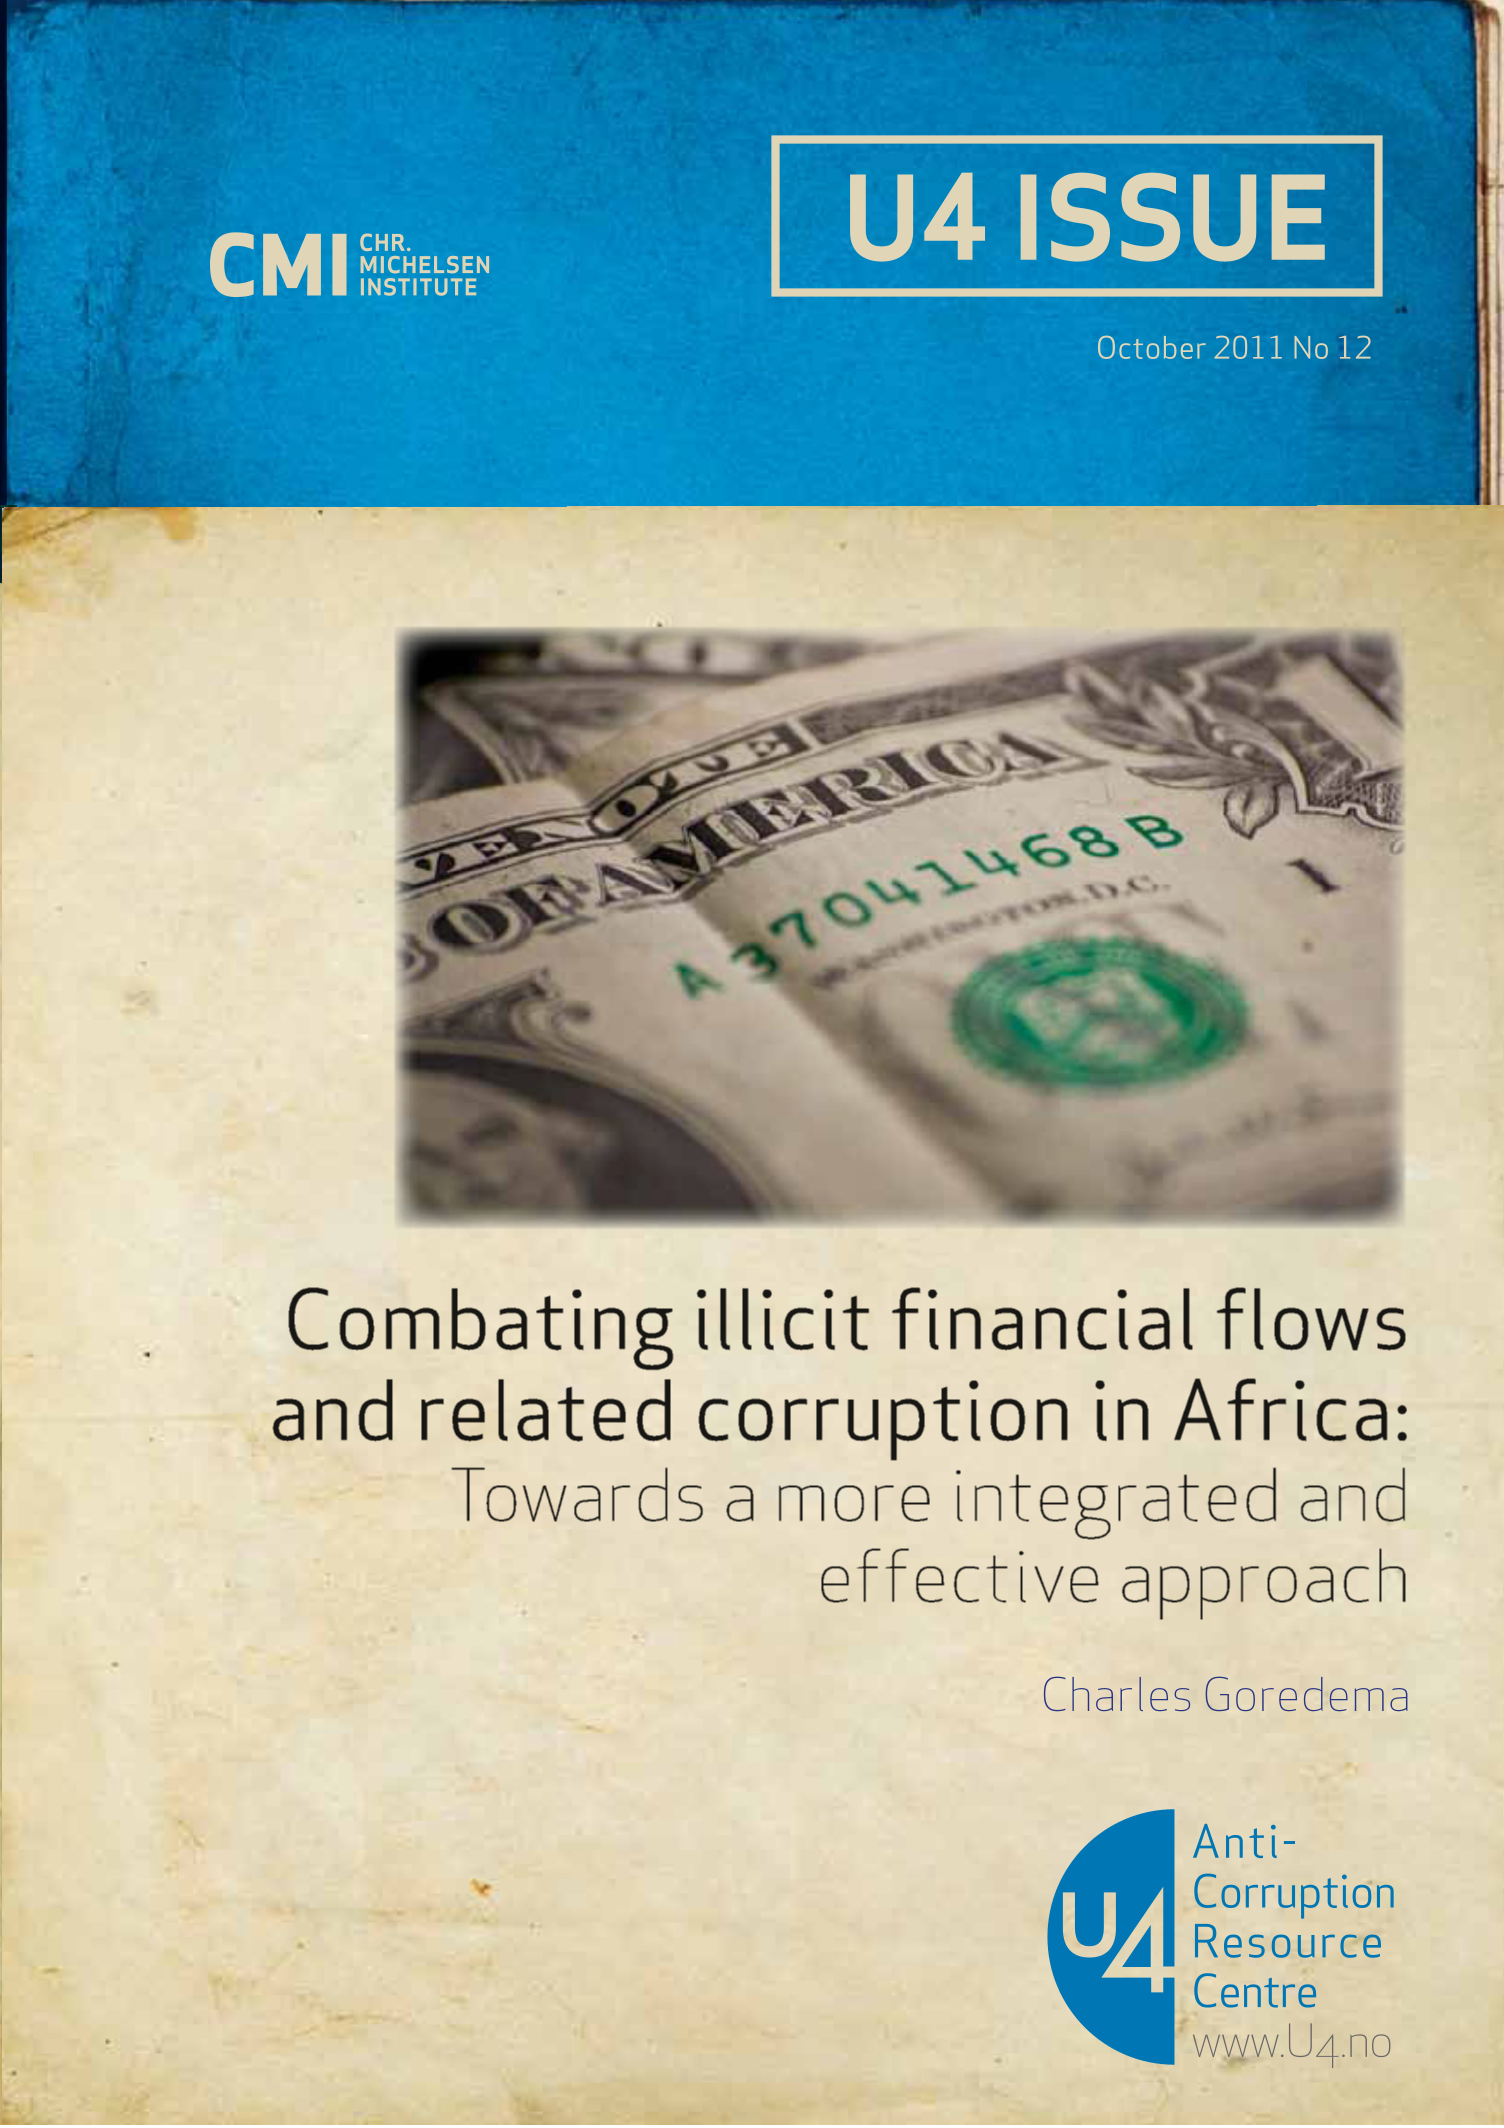 Combating illicit financial flows and related corruption in Africa: Towards a more integrated and effective approach